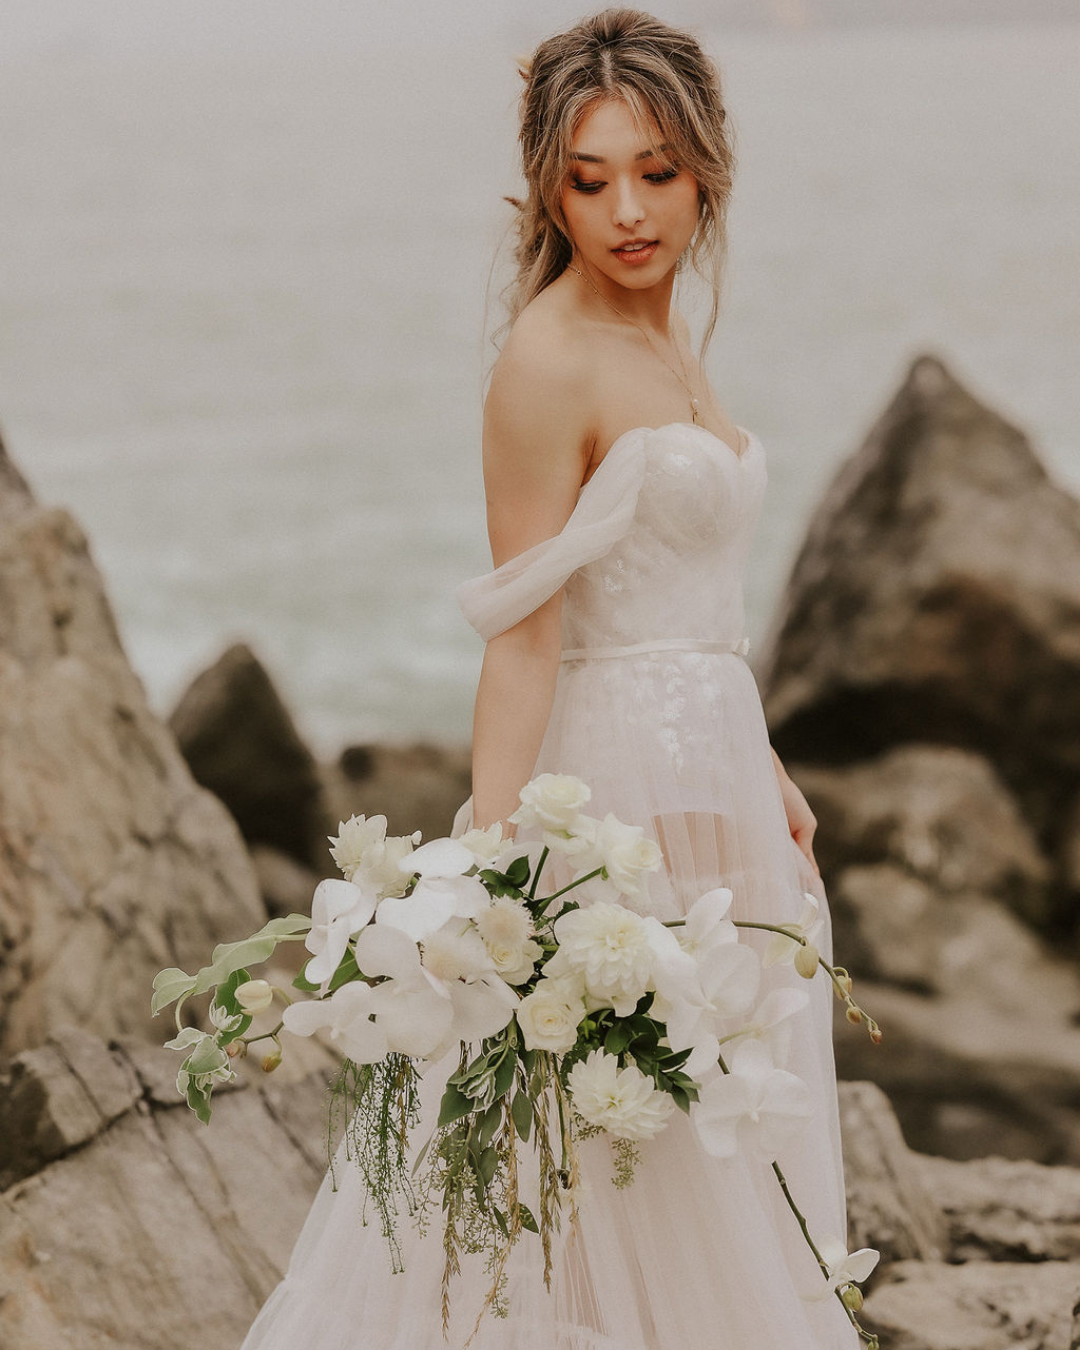 Bride in a an off-the-shoulder wedding dress by the ocean